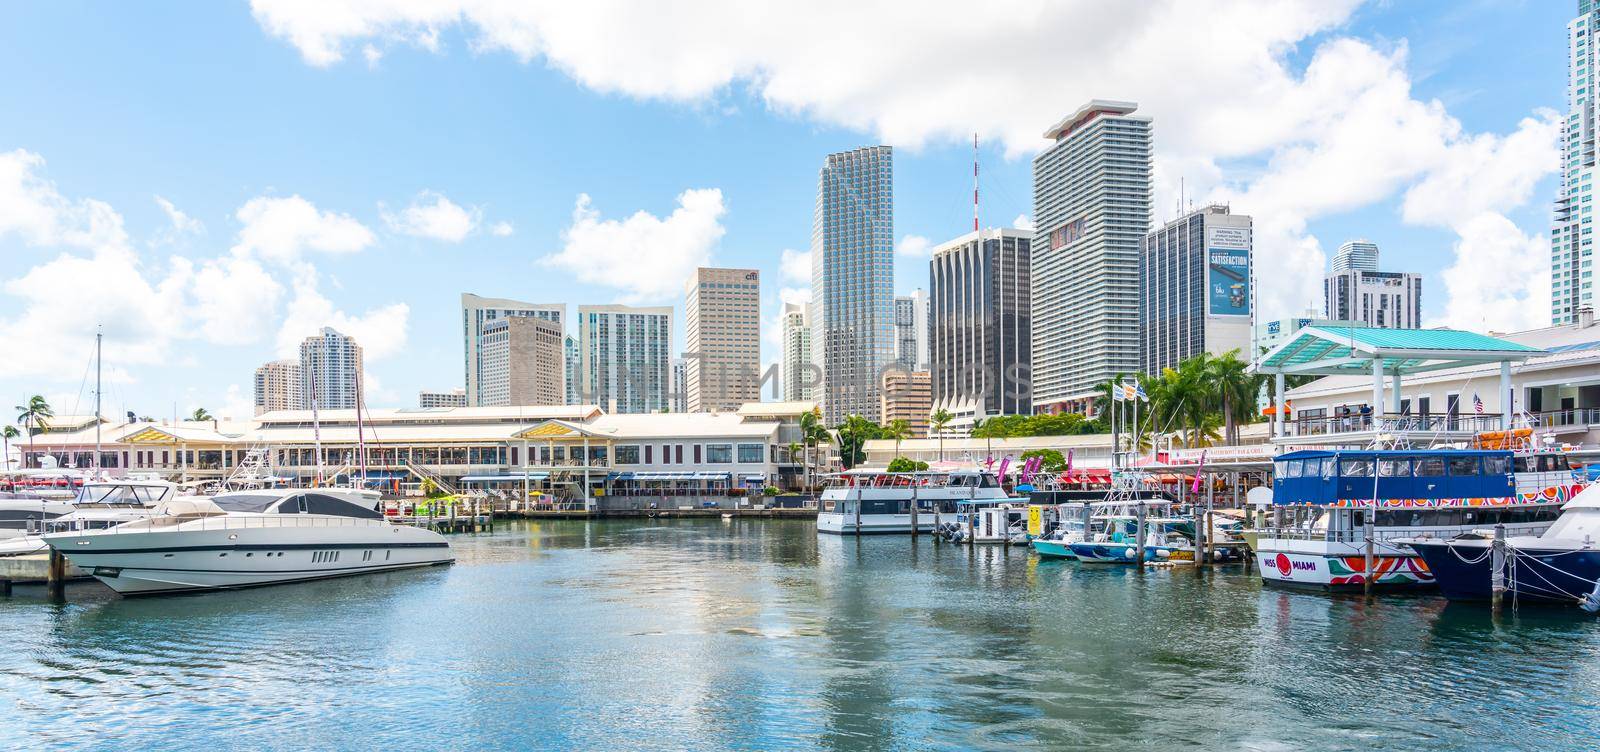 Miami, USA - September 11, 2019: View of the Marina in Miami Bayside with modern buildings and skyline in the background by Mariakray